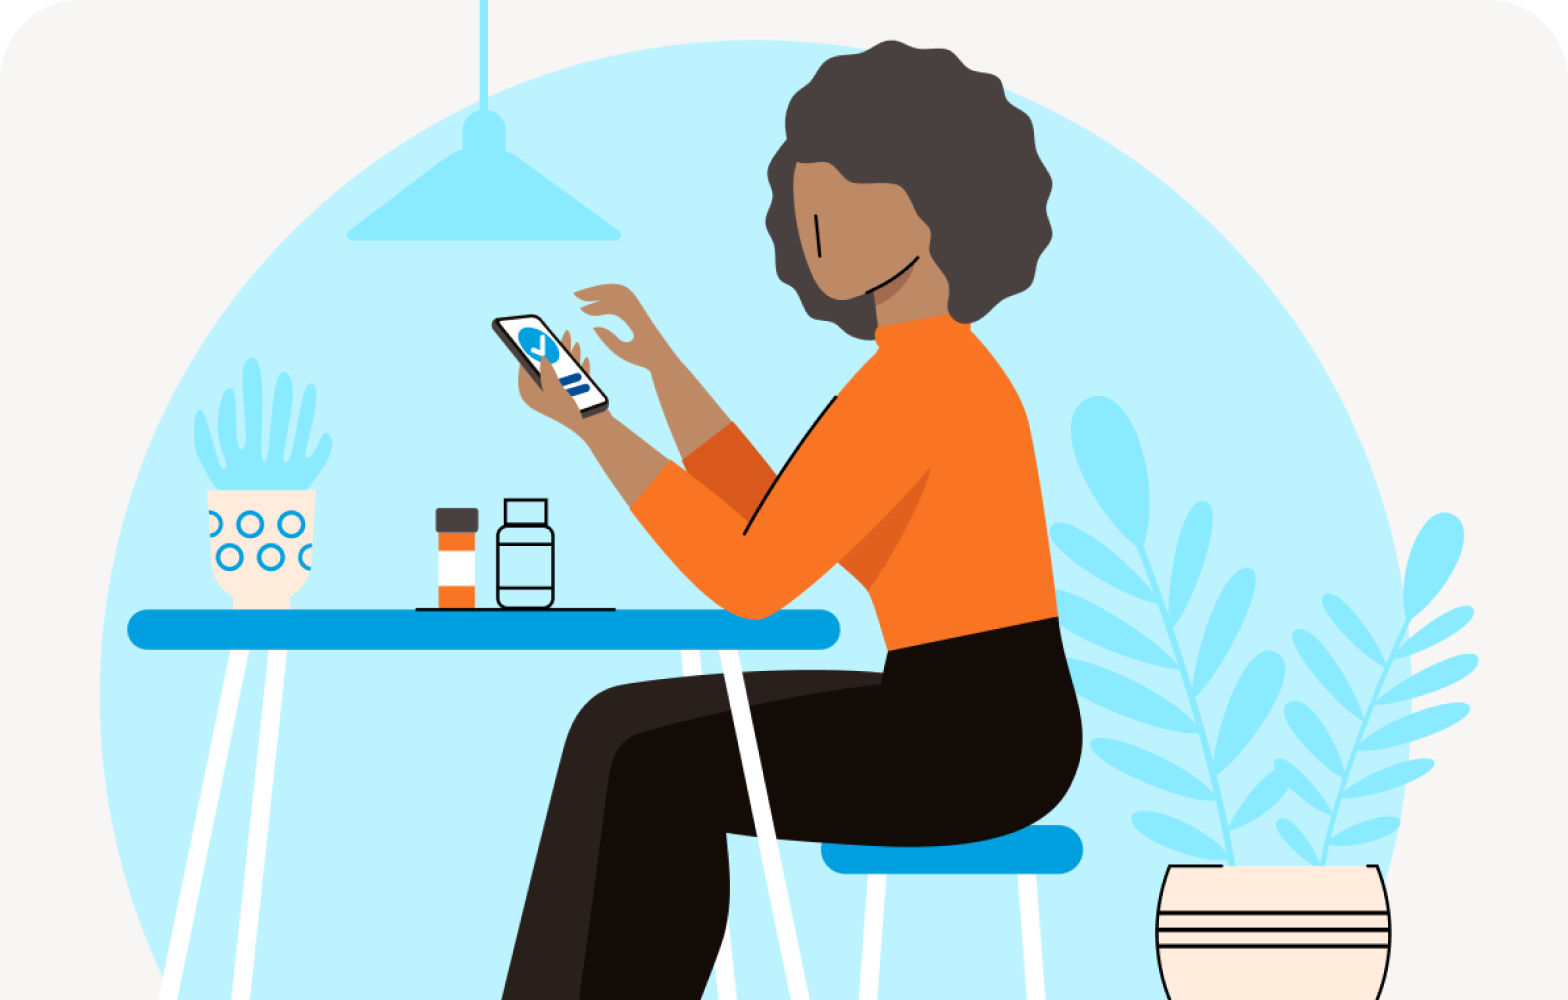 Illustrated image of a woman sitting at a table looking at her phone